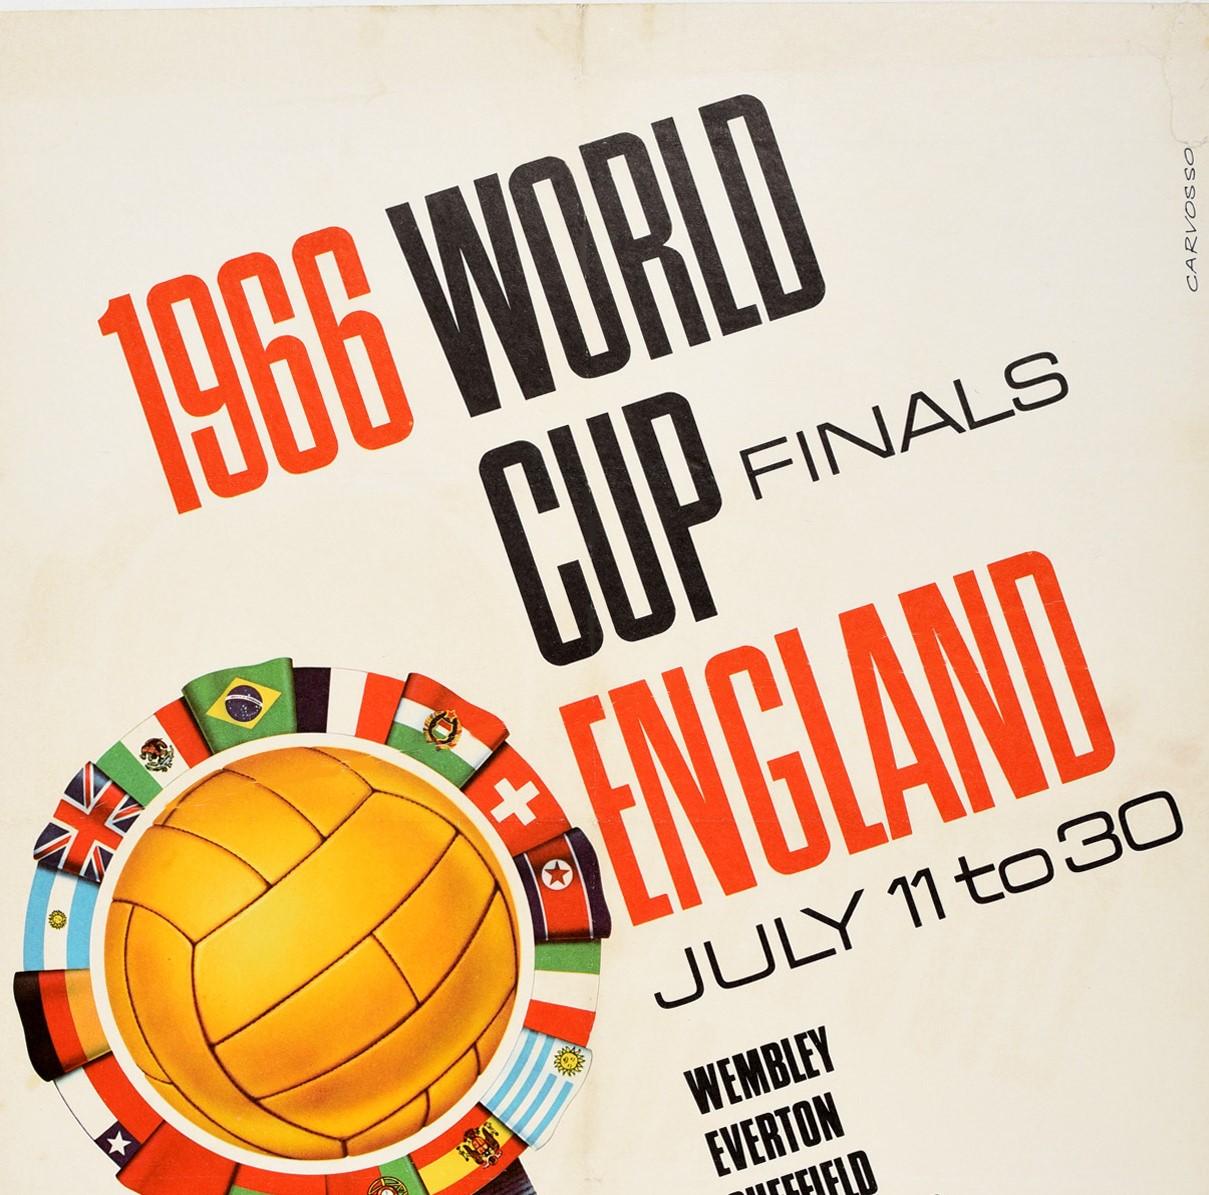 Original Vintage Poster 1966 World Cup Finals England Wembley July Football FIFA - Print by Carvosso